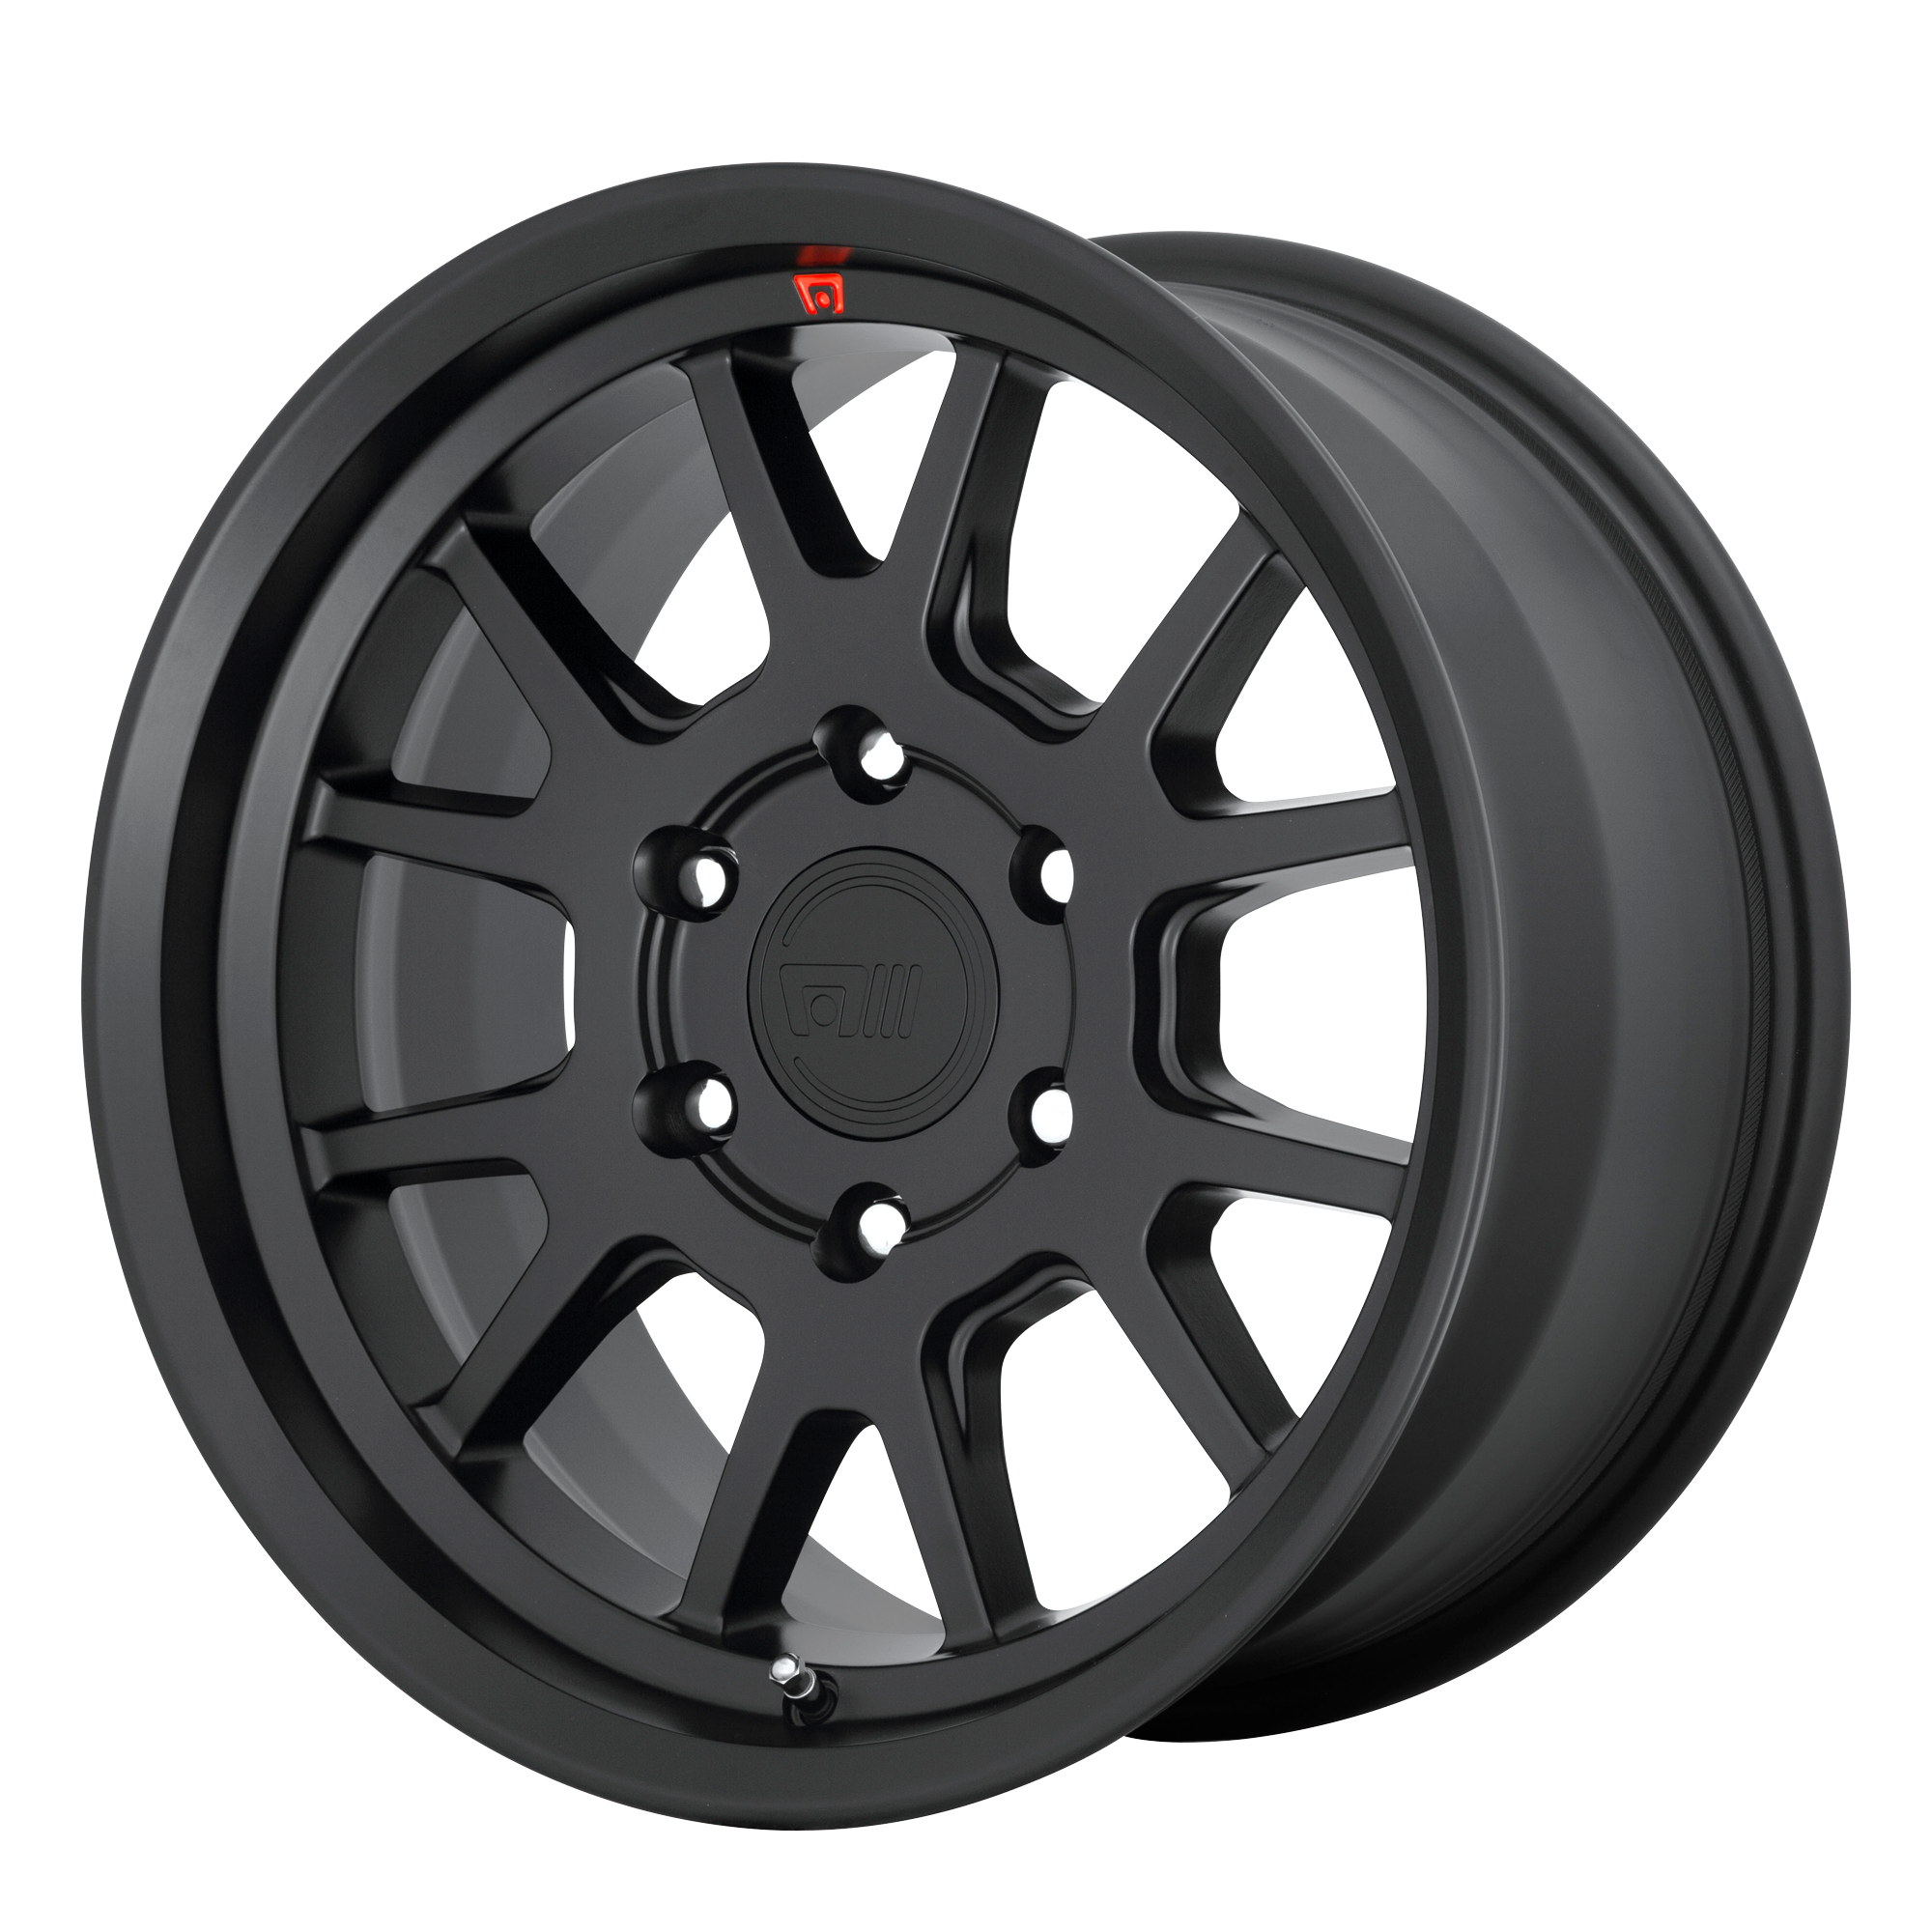 MT6 17x8.5 5x150.00 SATIN BLACK (18 mm) - Tires and Engine Performance